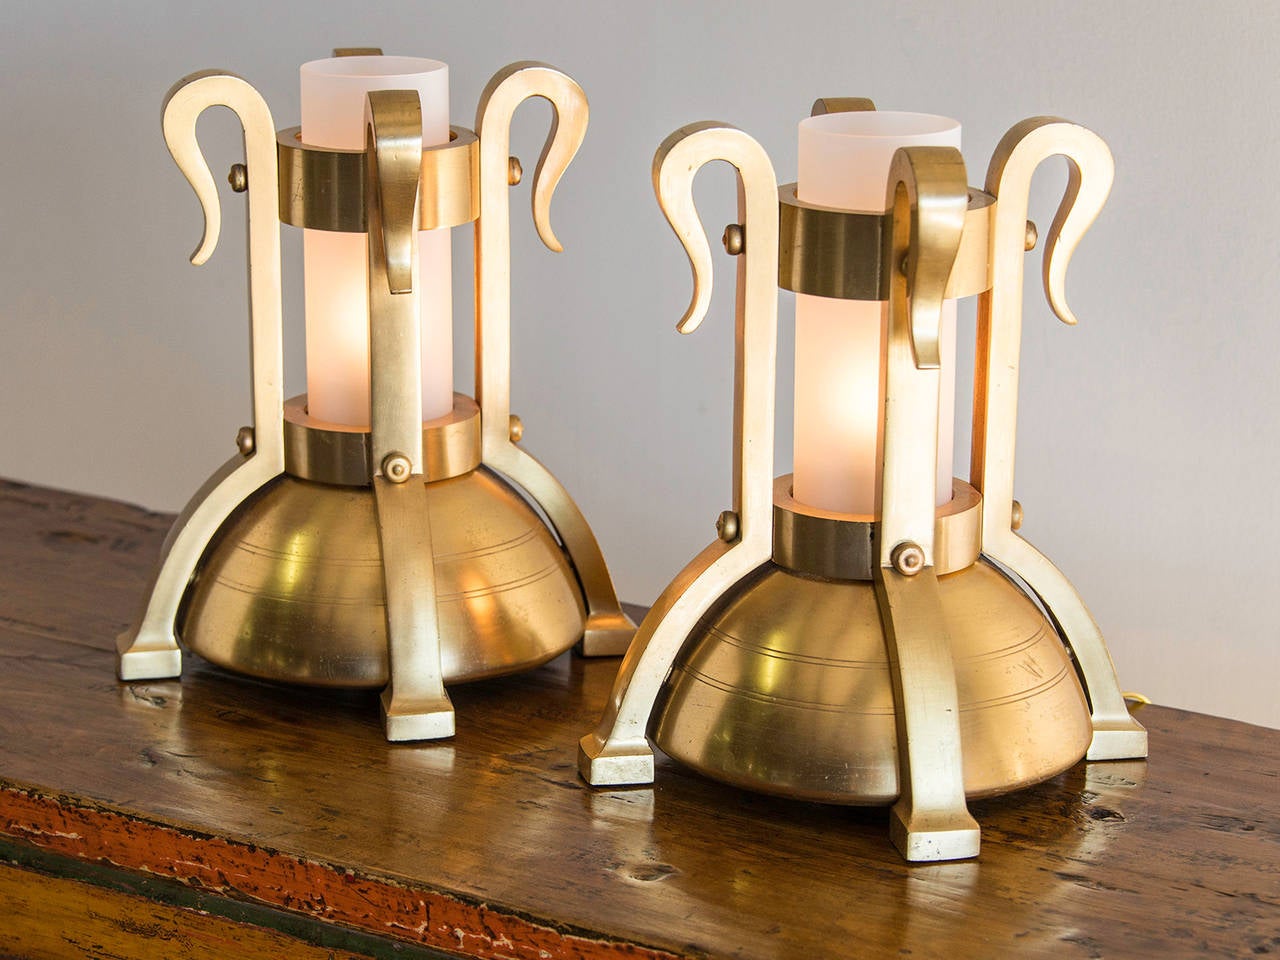 A pair of Art Deco period bronze doré fittings from Italy c. 1930 mounted as custom lamps. The gold washed bronze creates a highly luminous effect and the substantial weight is immediately apparent upon lifting each piece. The half spherical base